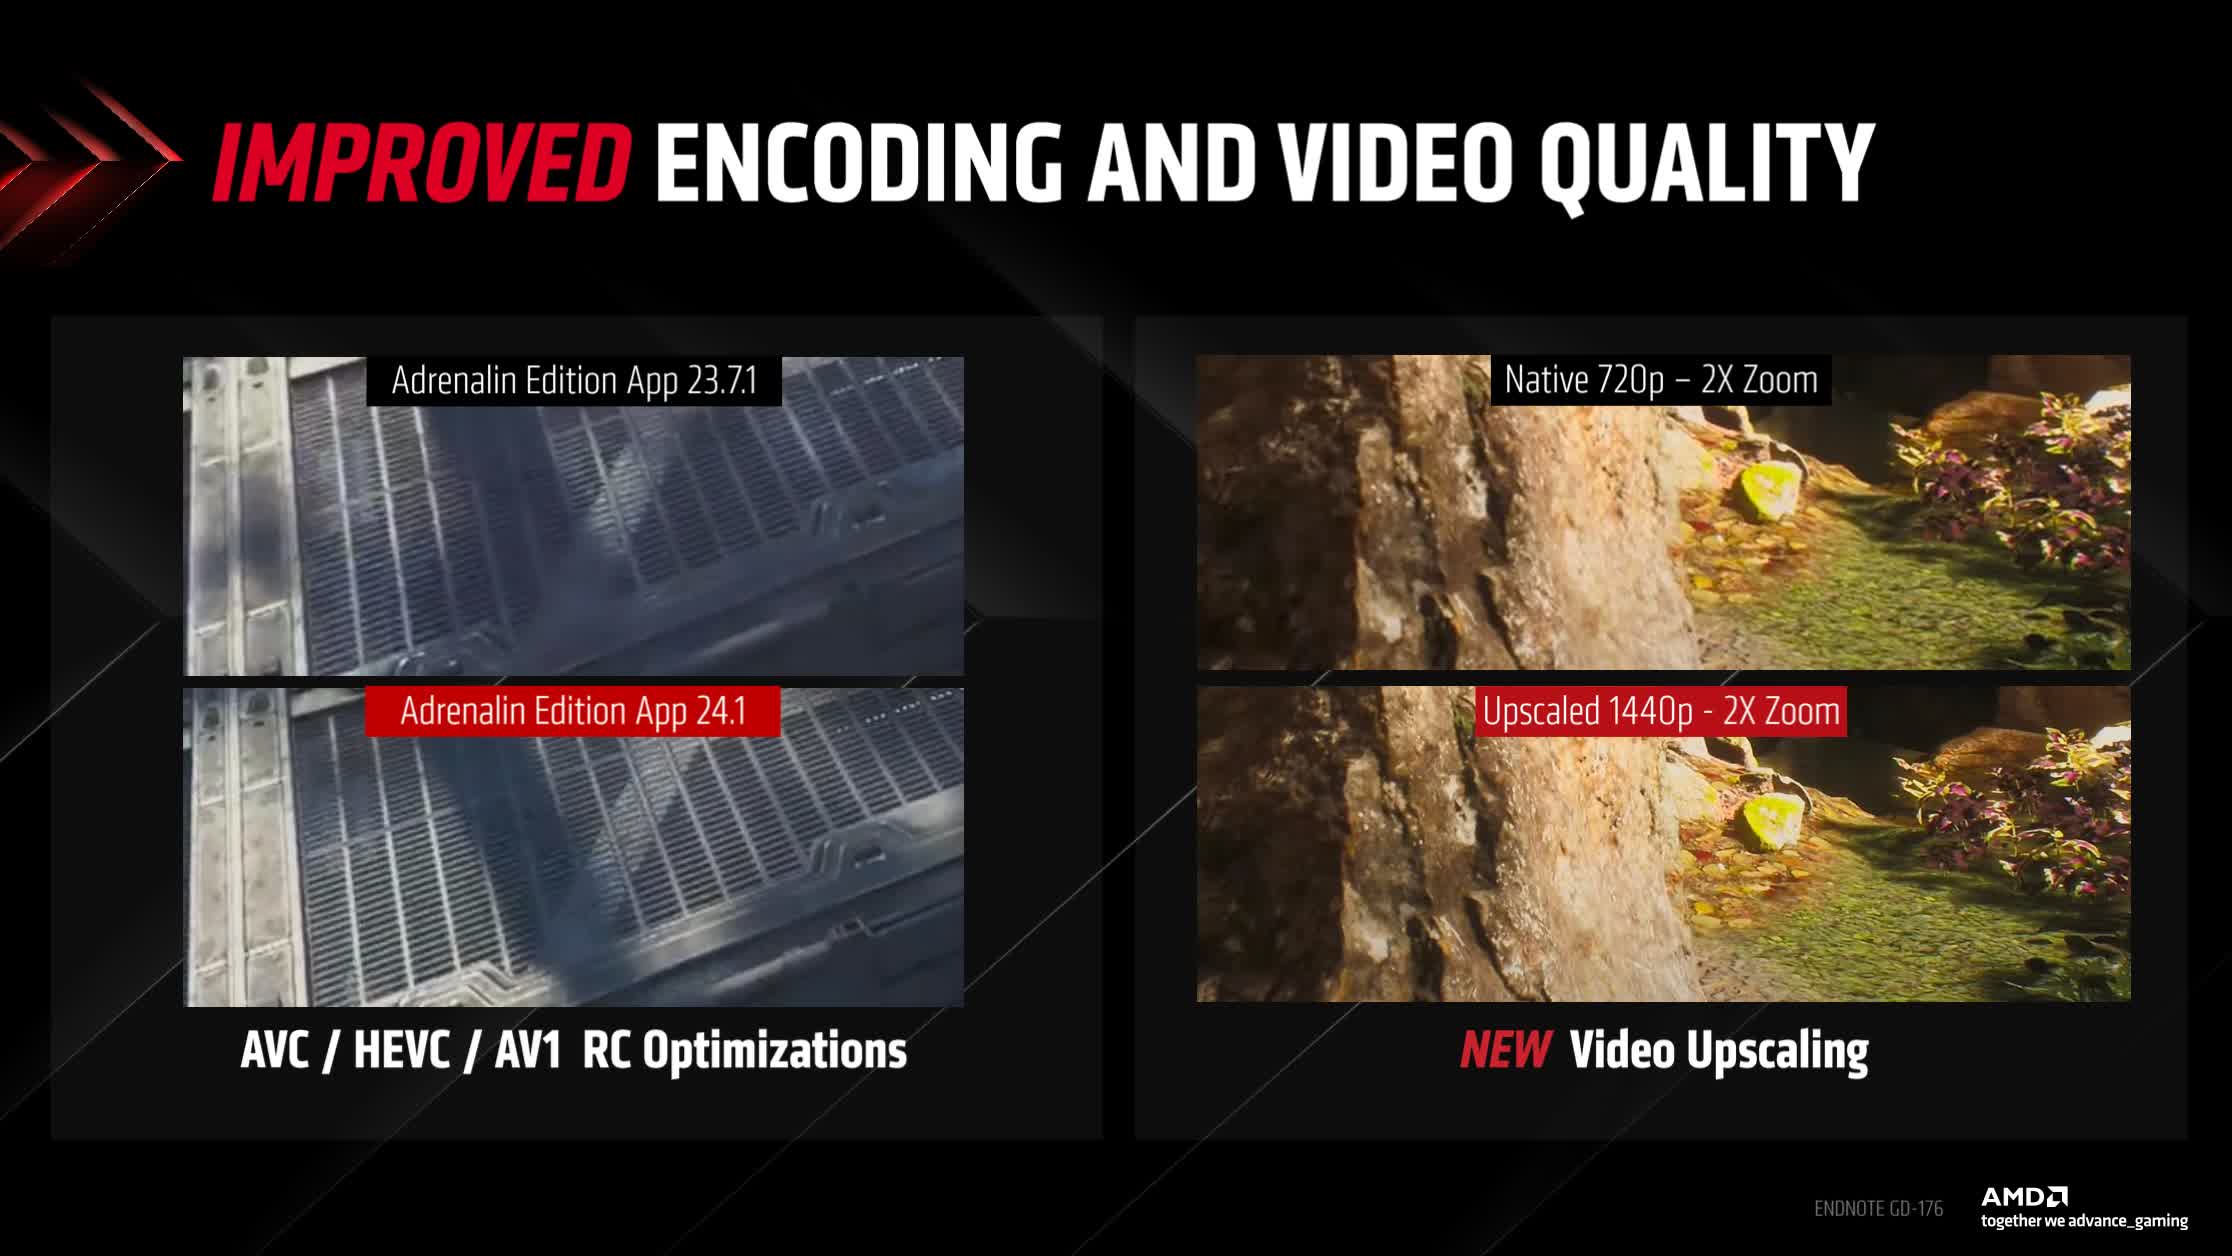 AMD FSR support is coming soon to YouTube and VLC